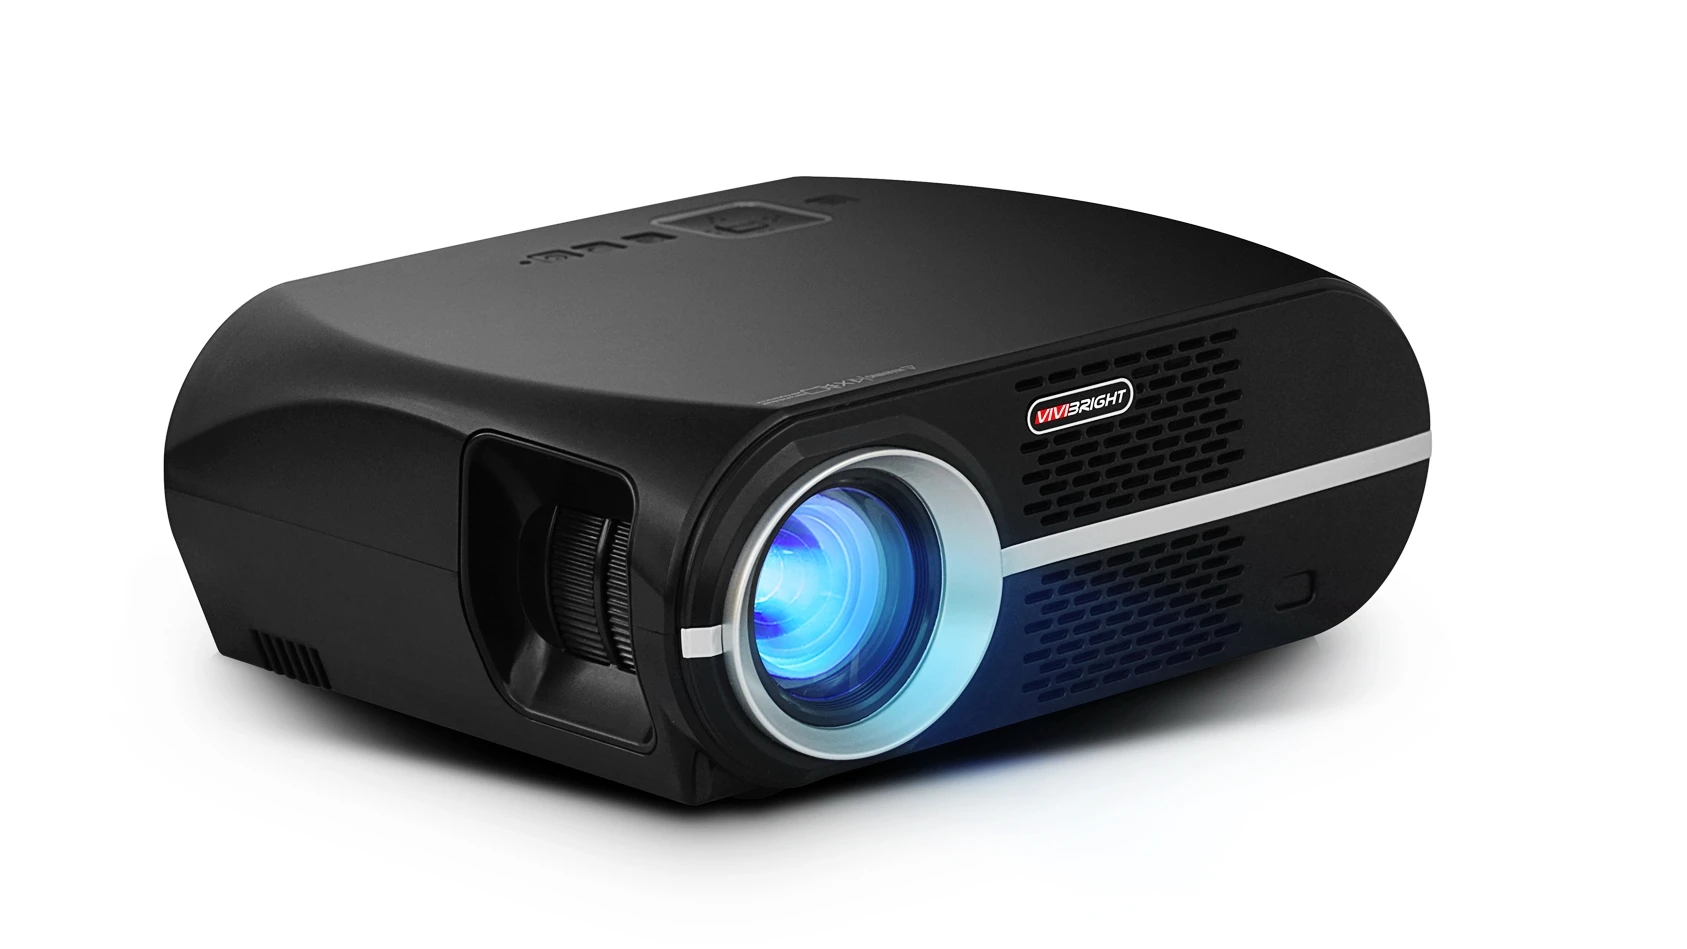 2018 Newest digital projector for home theater best price portable LED game projector VIVIBRIGHT GP100 with 3500Lumens